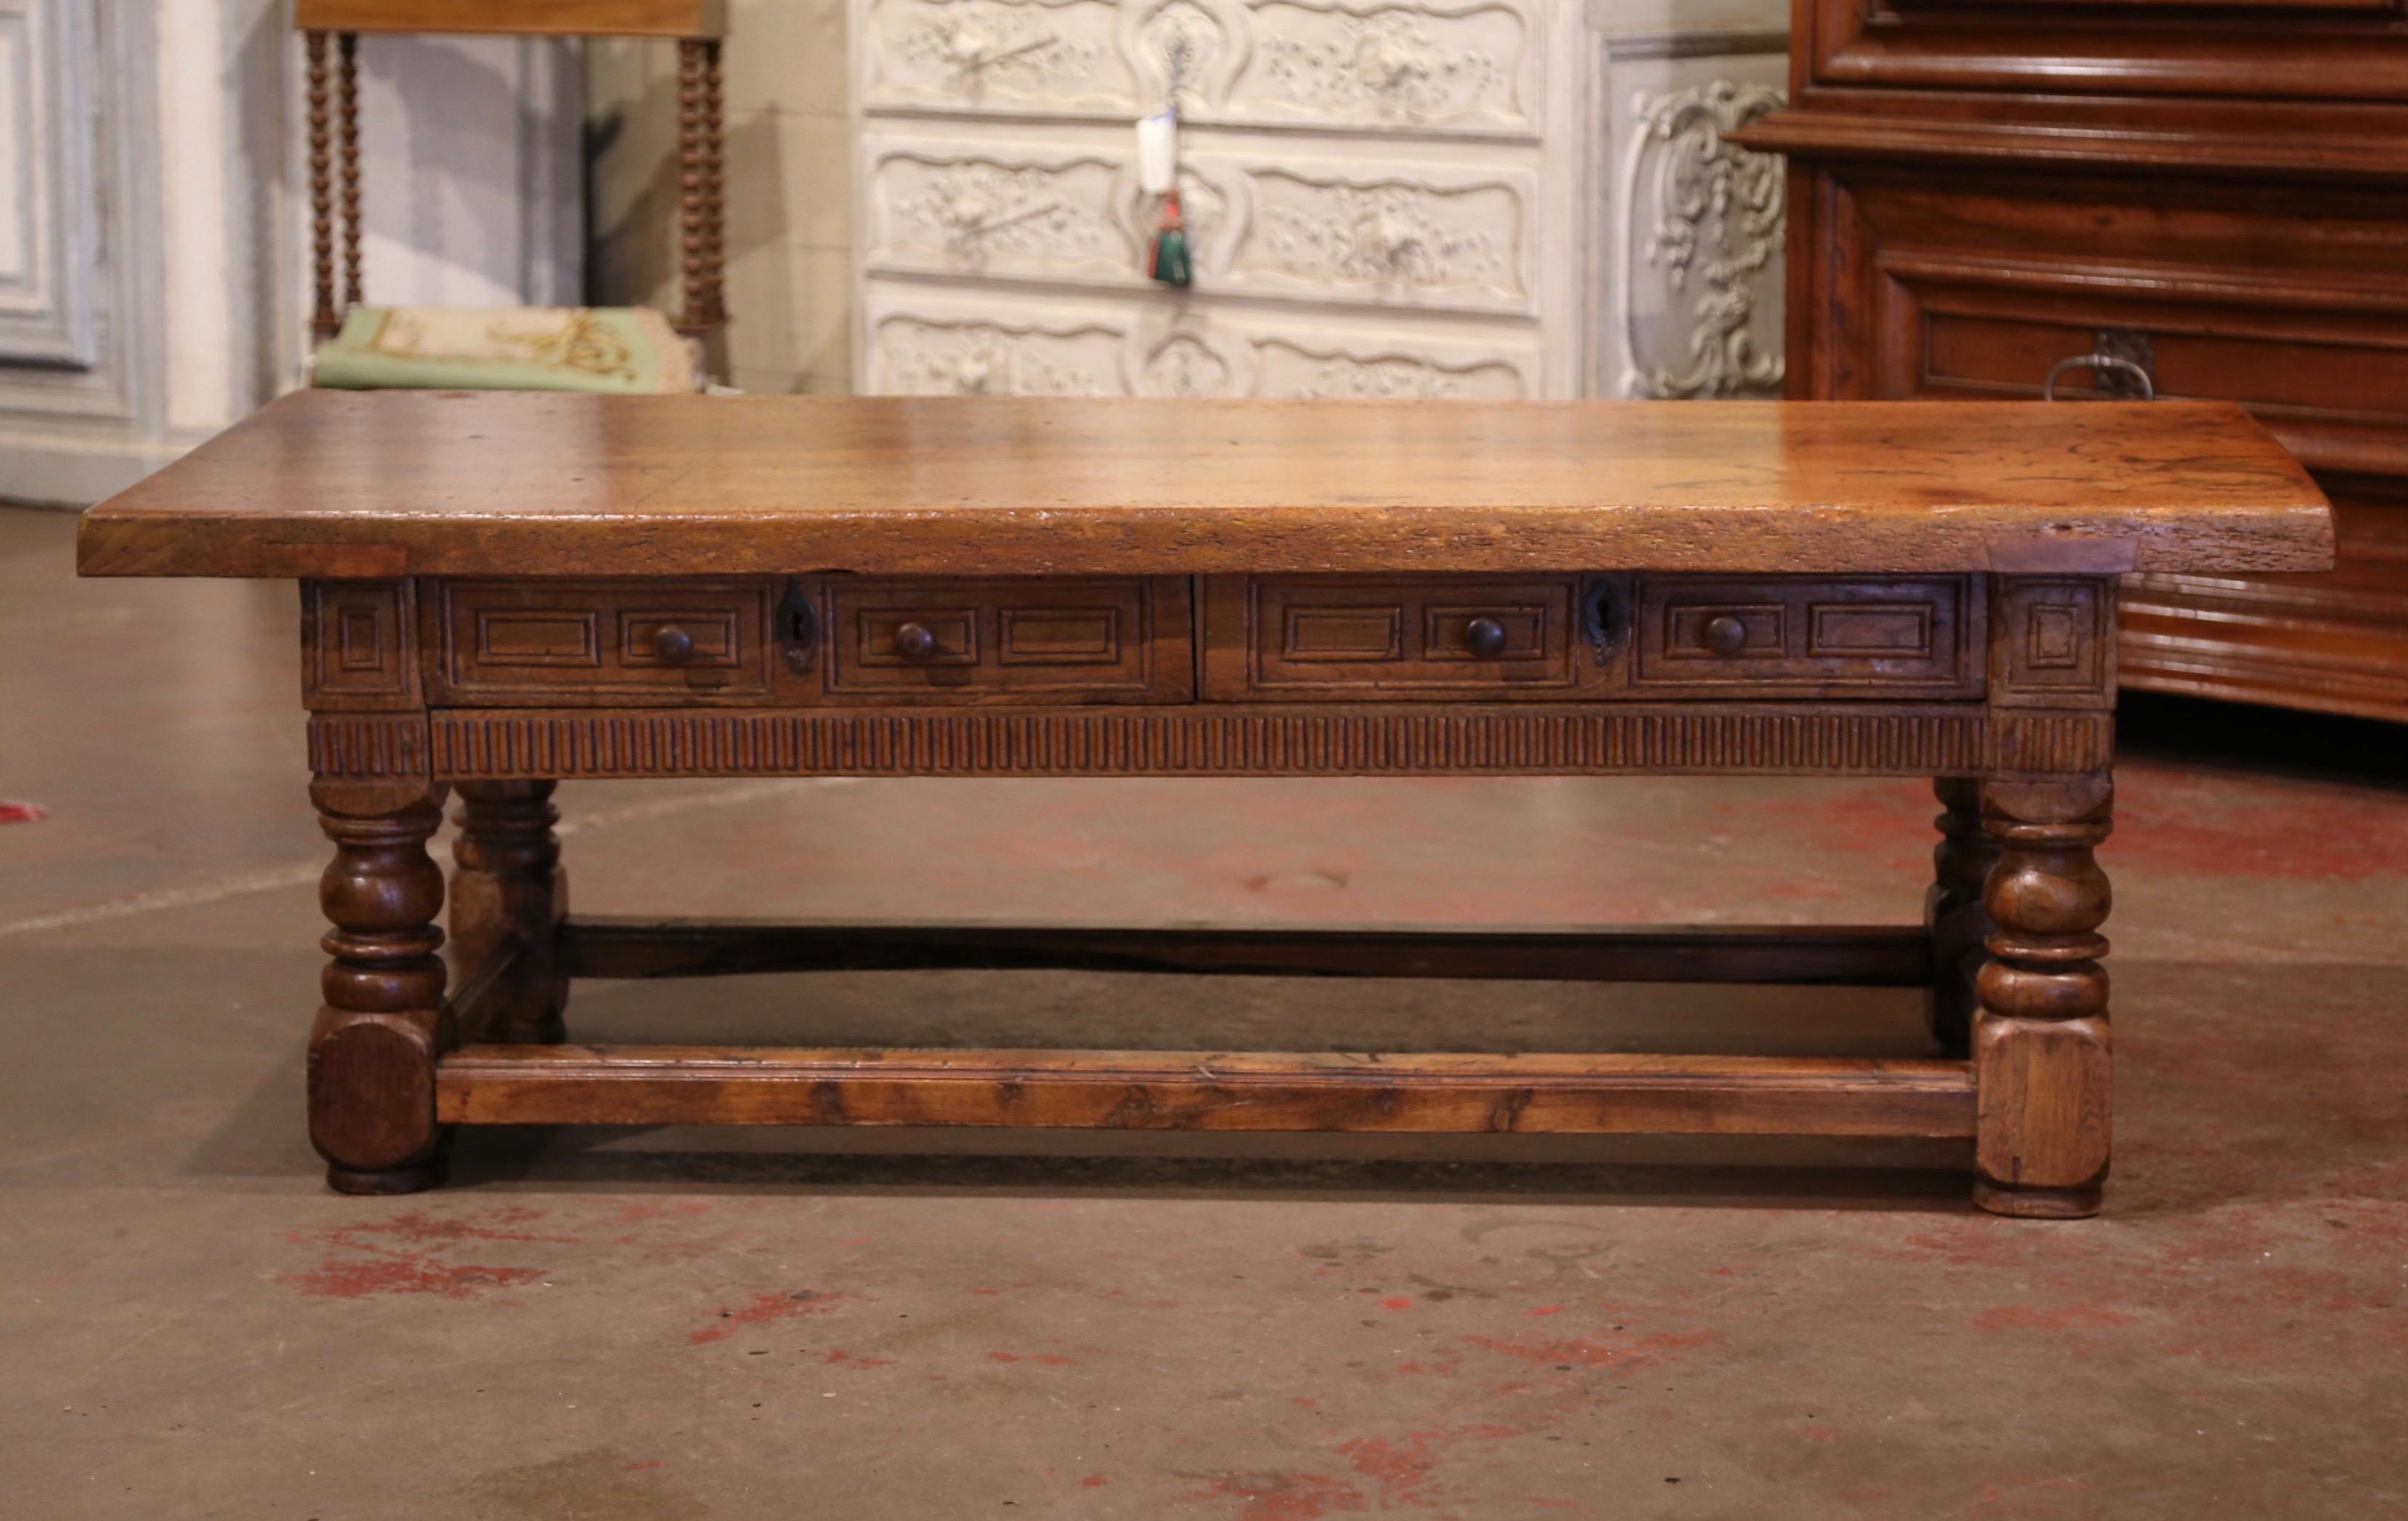 This elegant and large antique cut down table was crafted in Southern France, circa 1780. Standing on thick turned legs embellished with a decorative rectangular stretcher at the base, the large cocktail table features a top made of one single